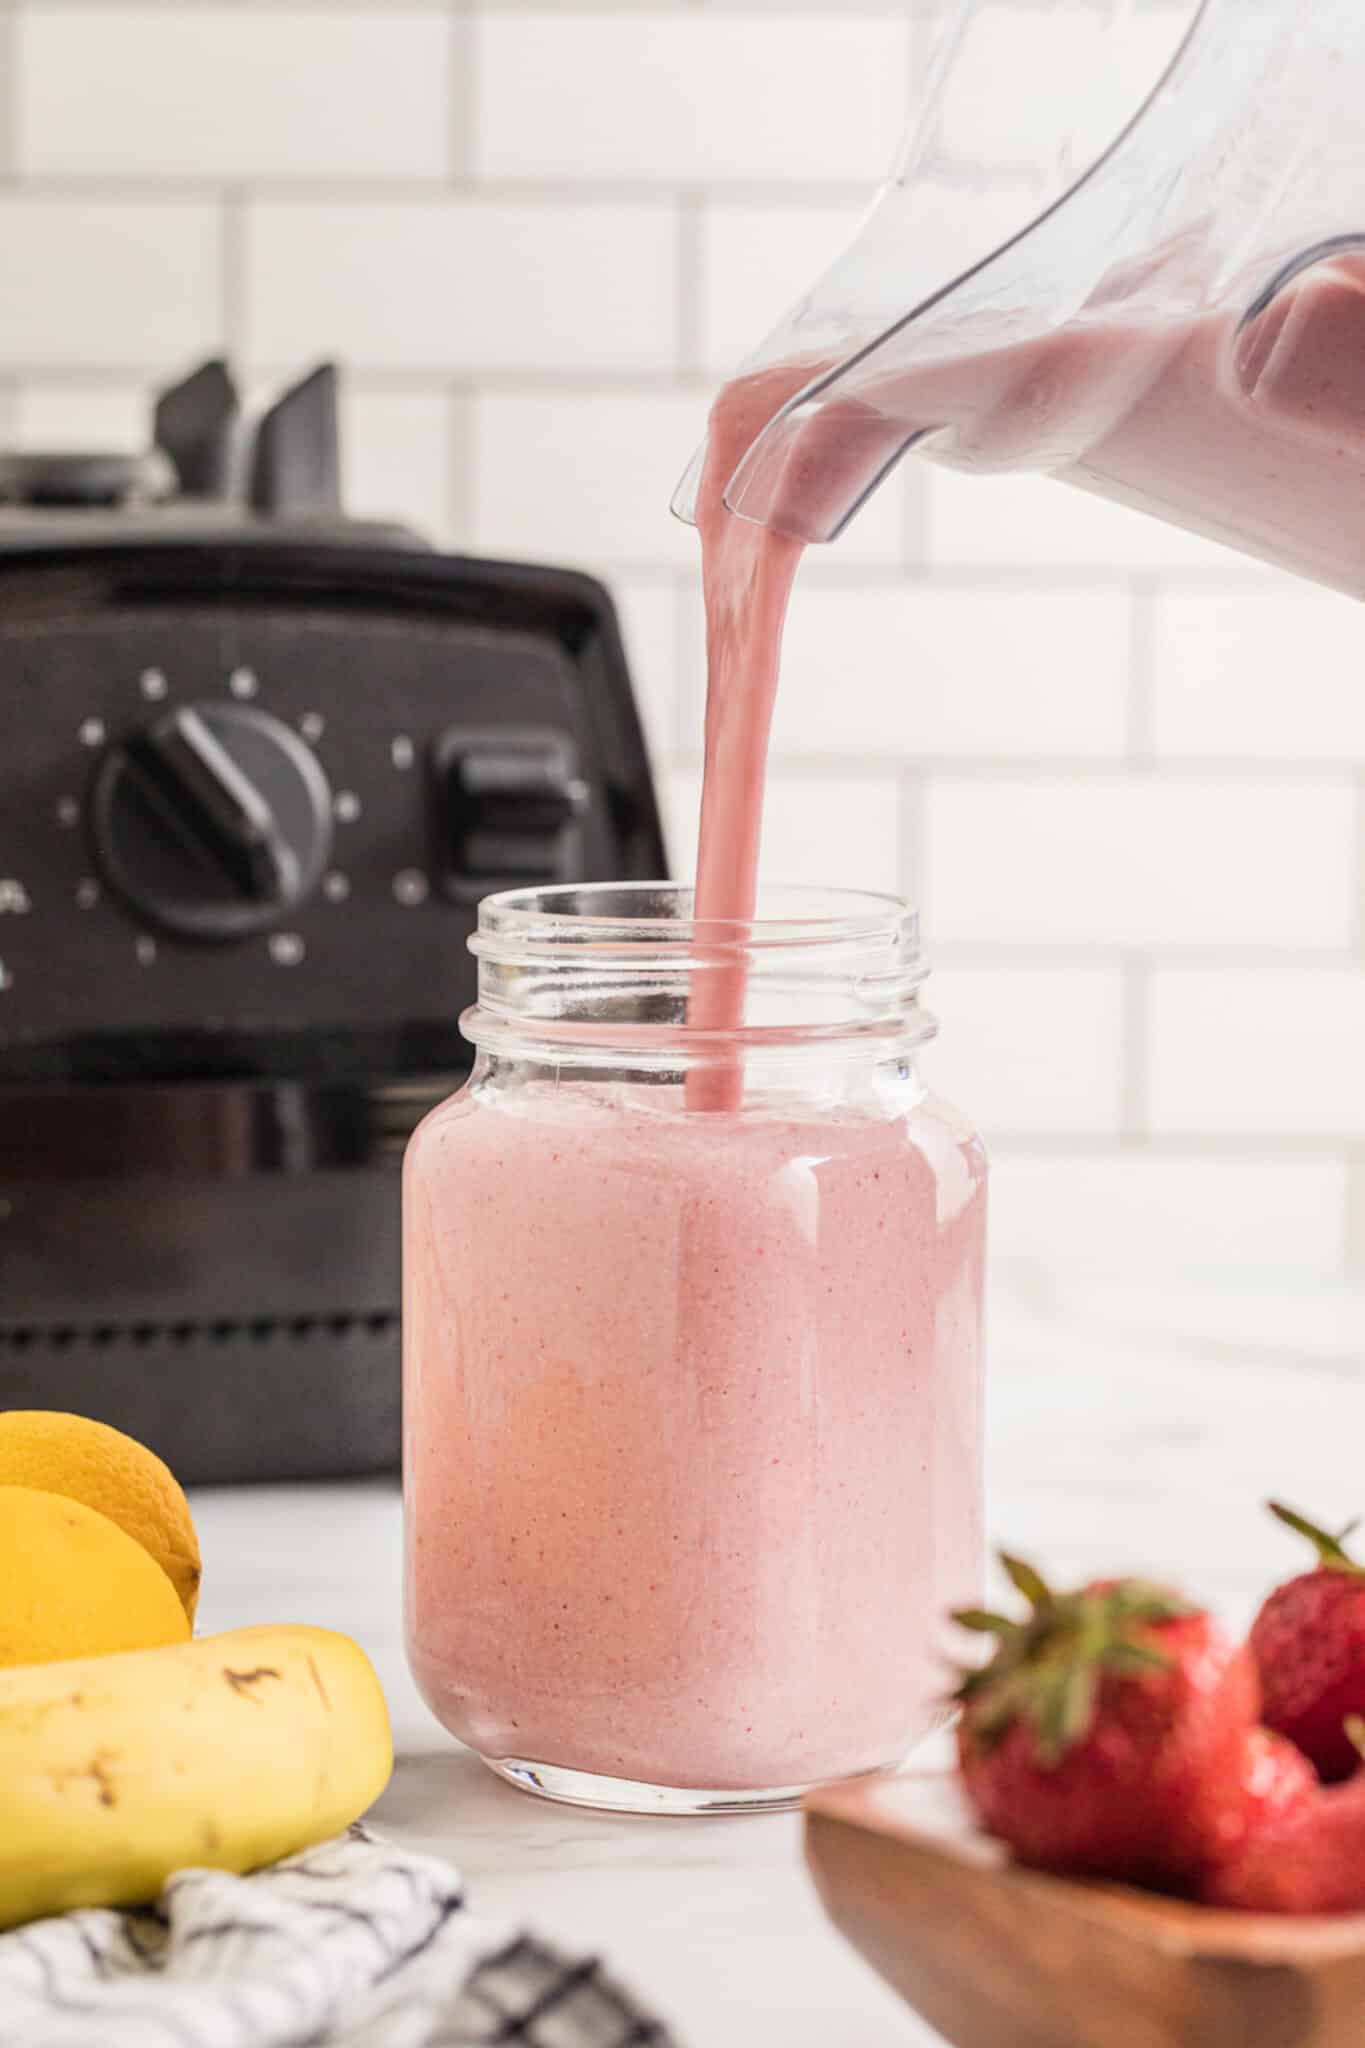 A Strawberry Cheesecake Smoothie being poured into a mason jar from a blender.